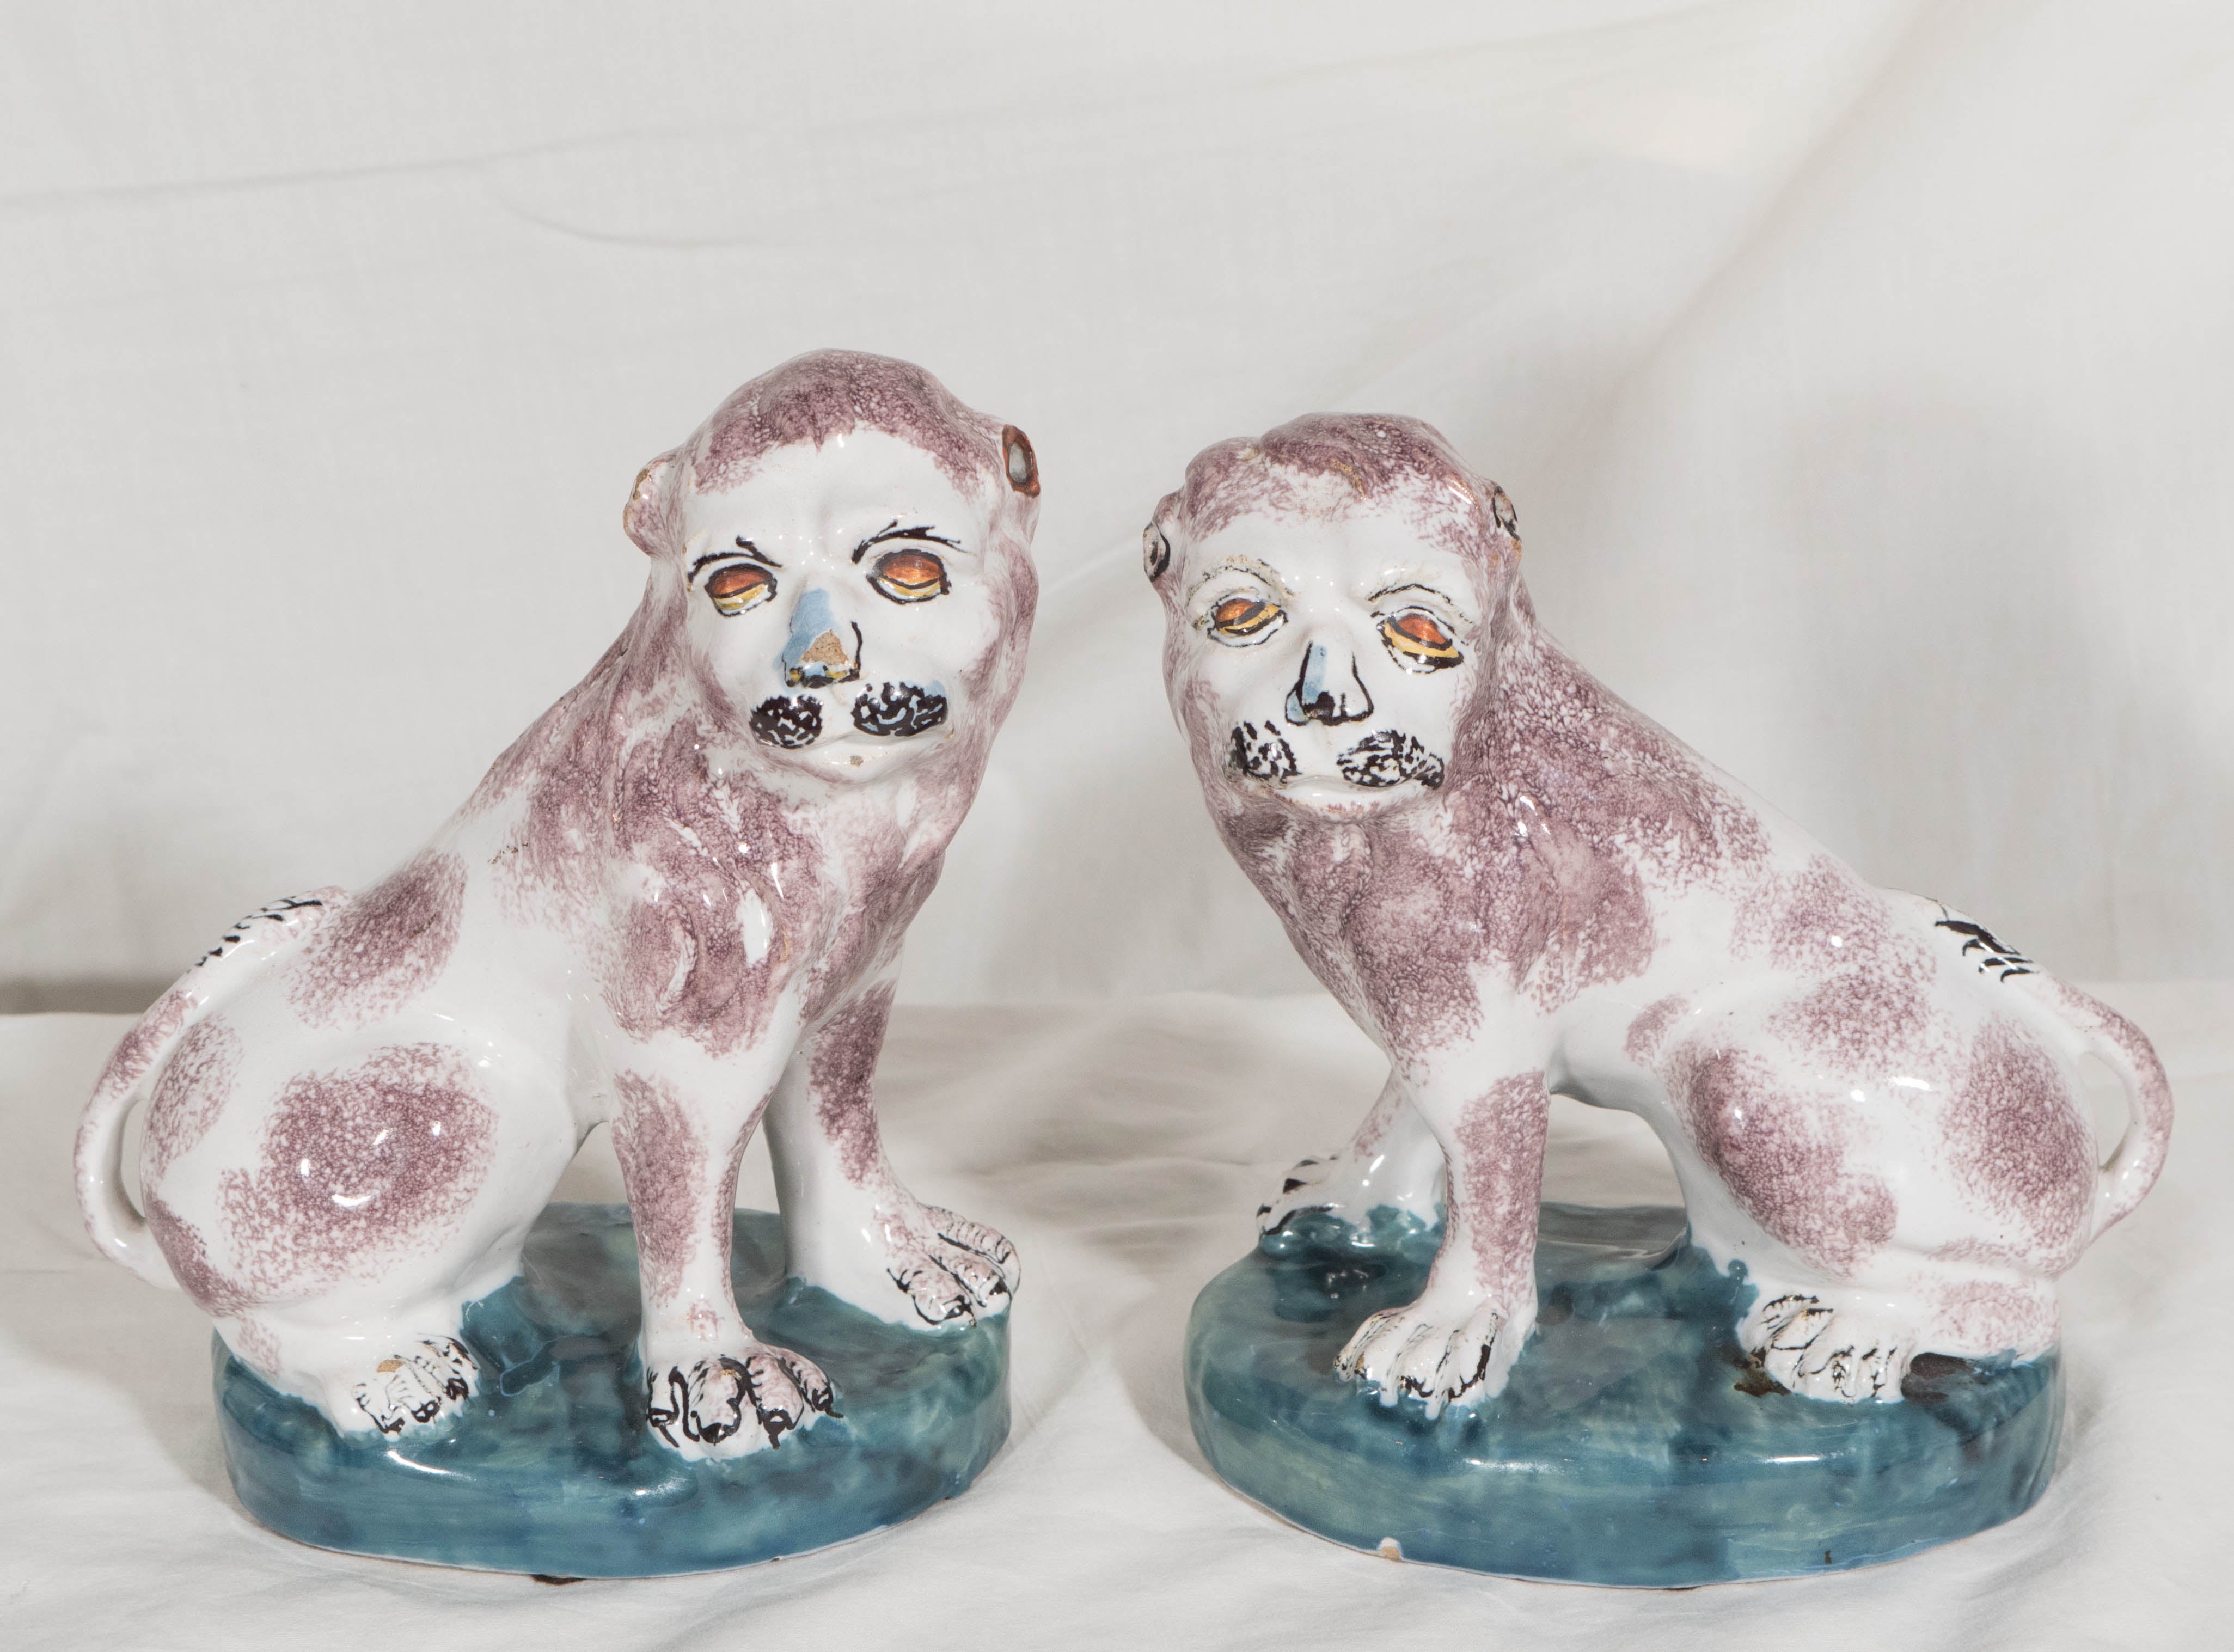 Antique Pair of 18th Century Brussels Faience Lions